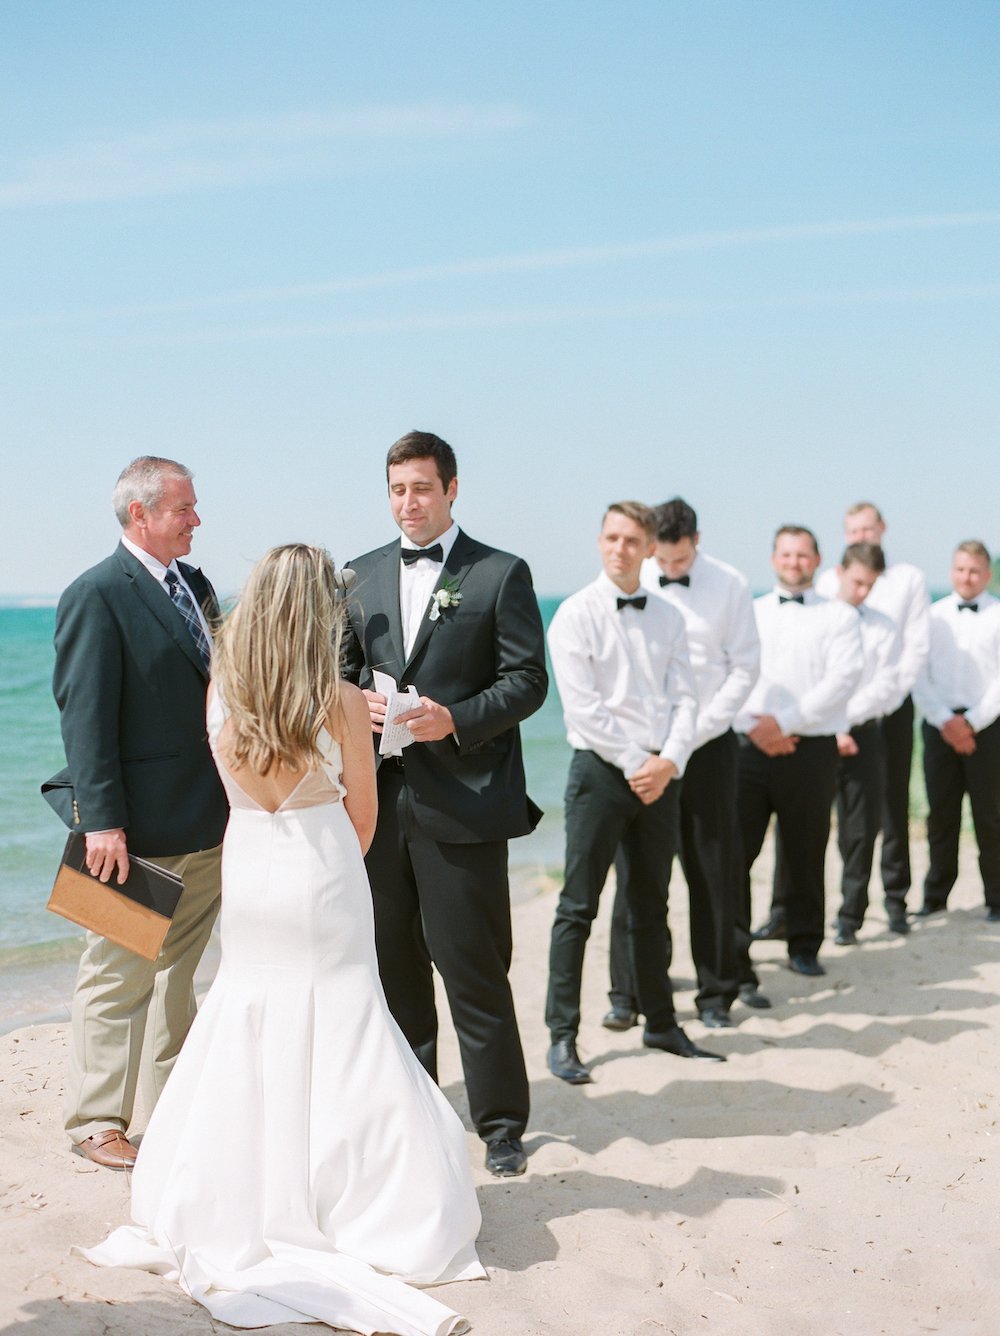 A couple getting married on the beach 